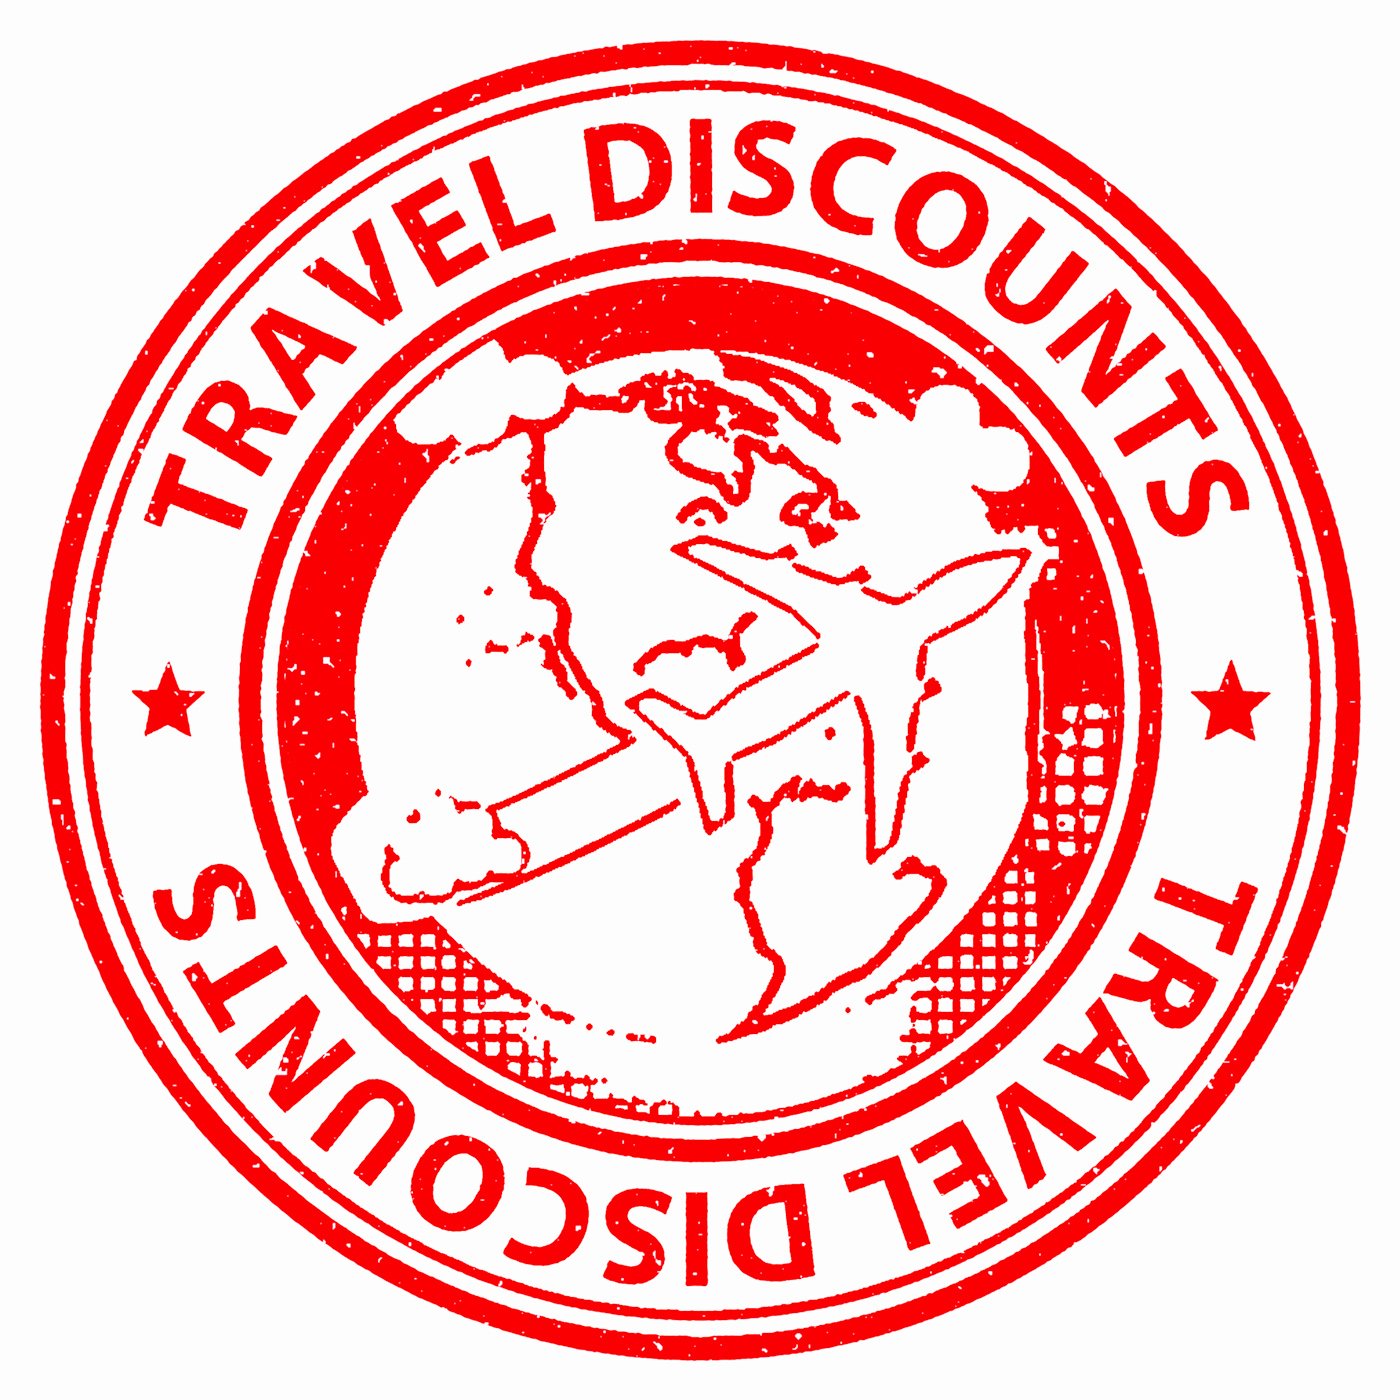 Travel discounts represents traveller discounted and save photo